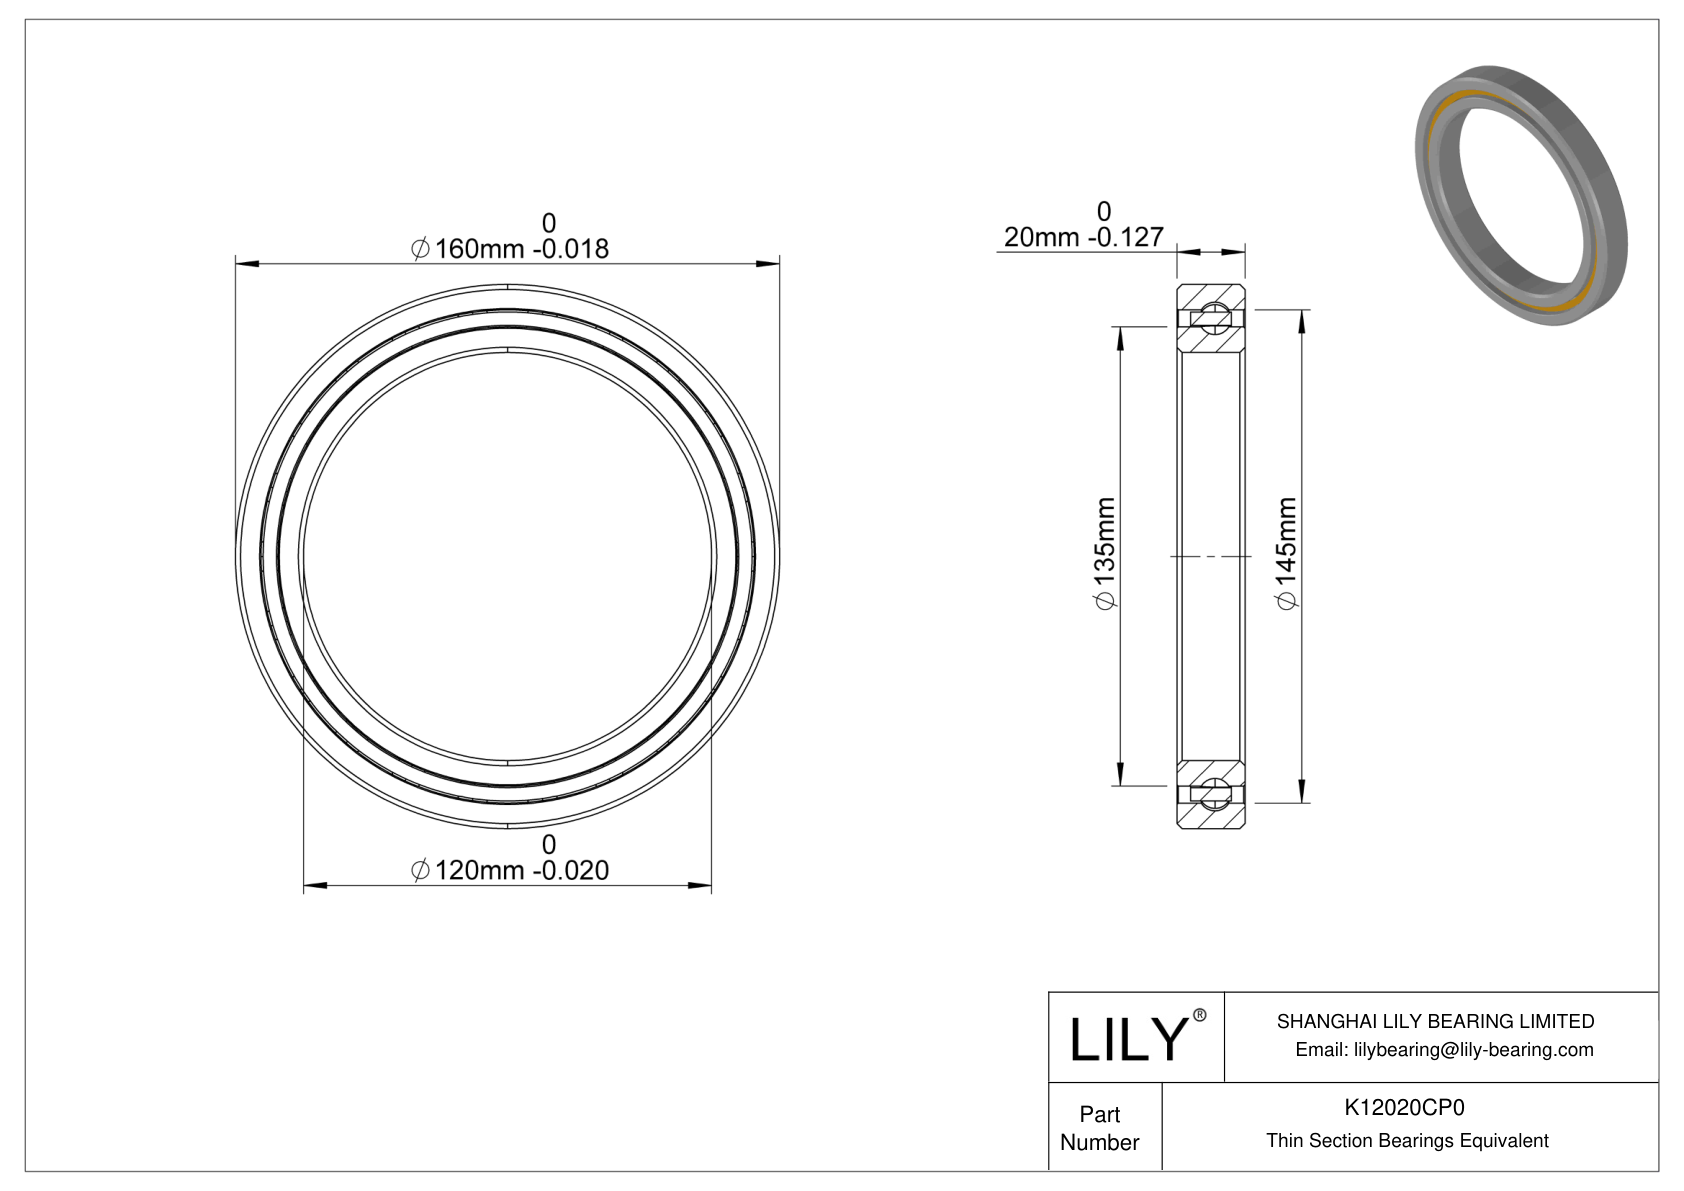 K12020CP0 Constant Section (CS) Bearings cad drawing